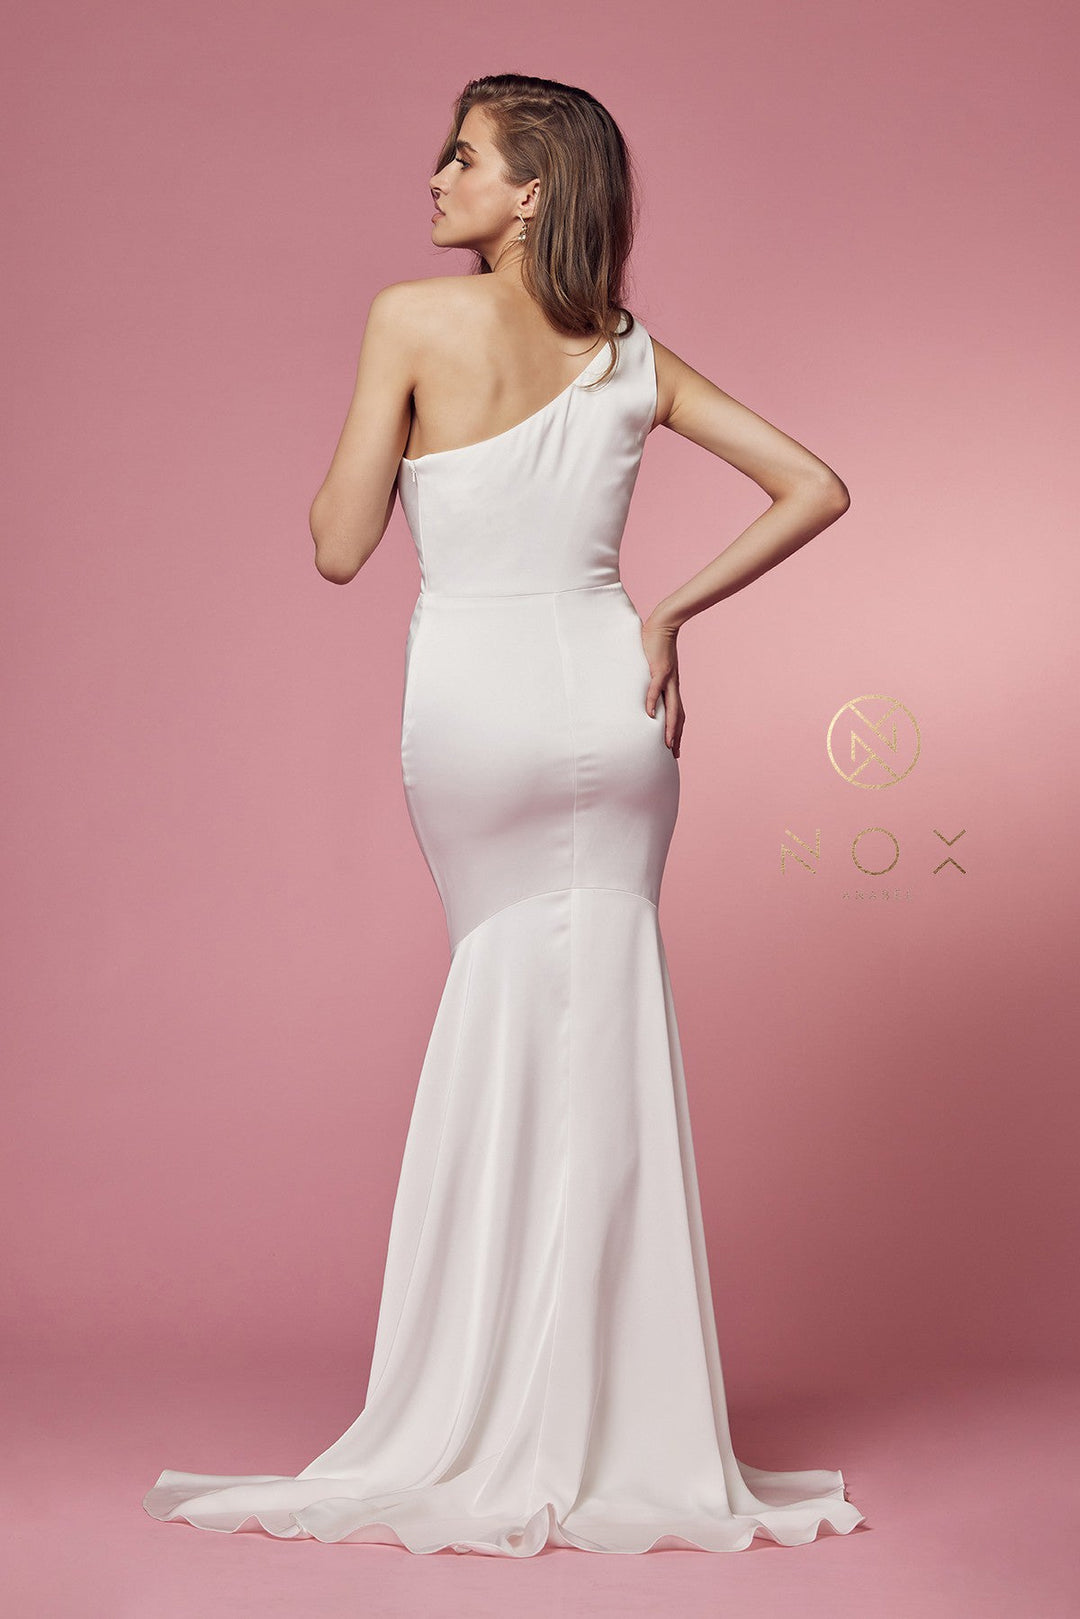 White Fitted One Shoulder Gown by Nox Anabel E483